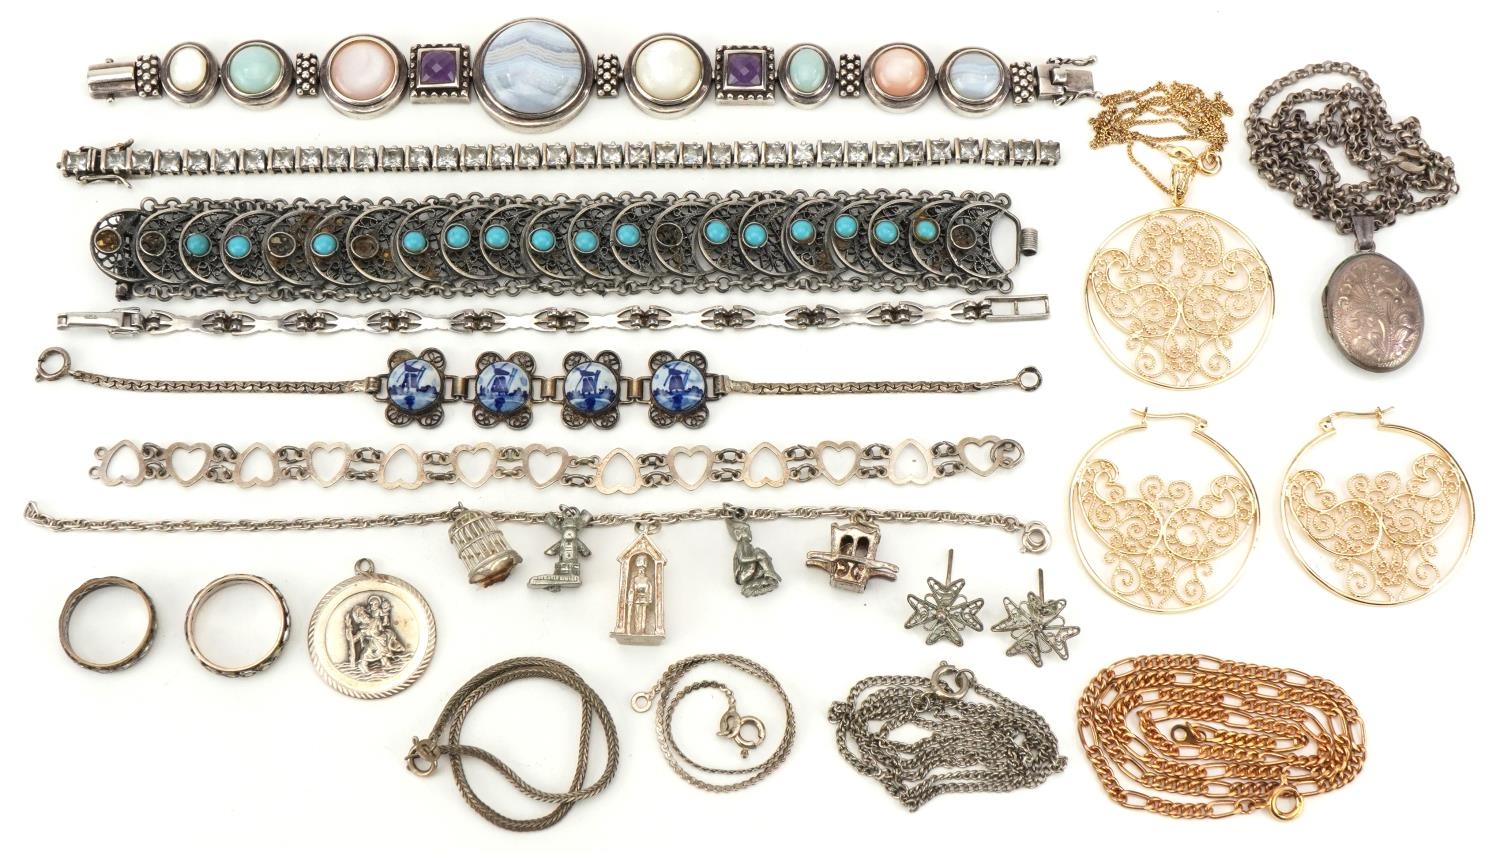 Vintage and later silver and white metal jewellery including a charm bracelet, floral engraved